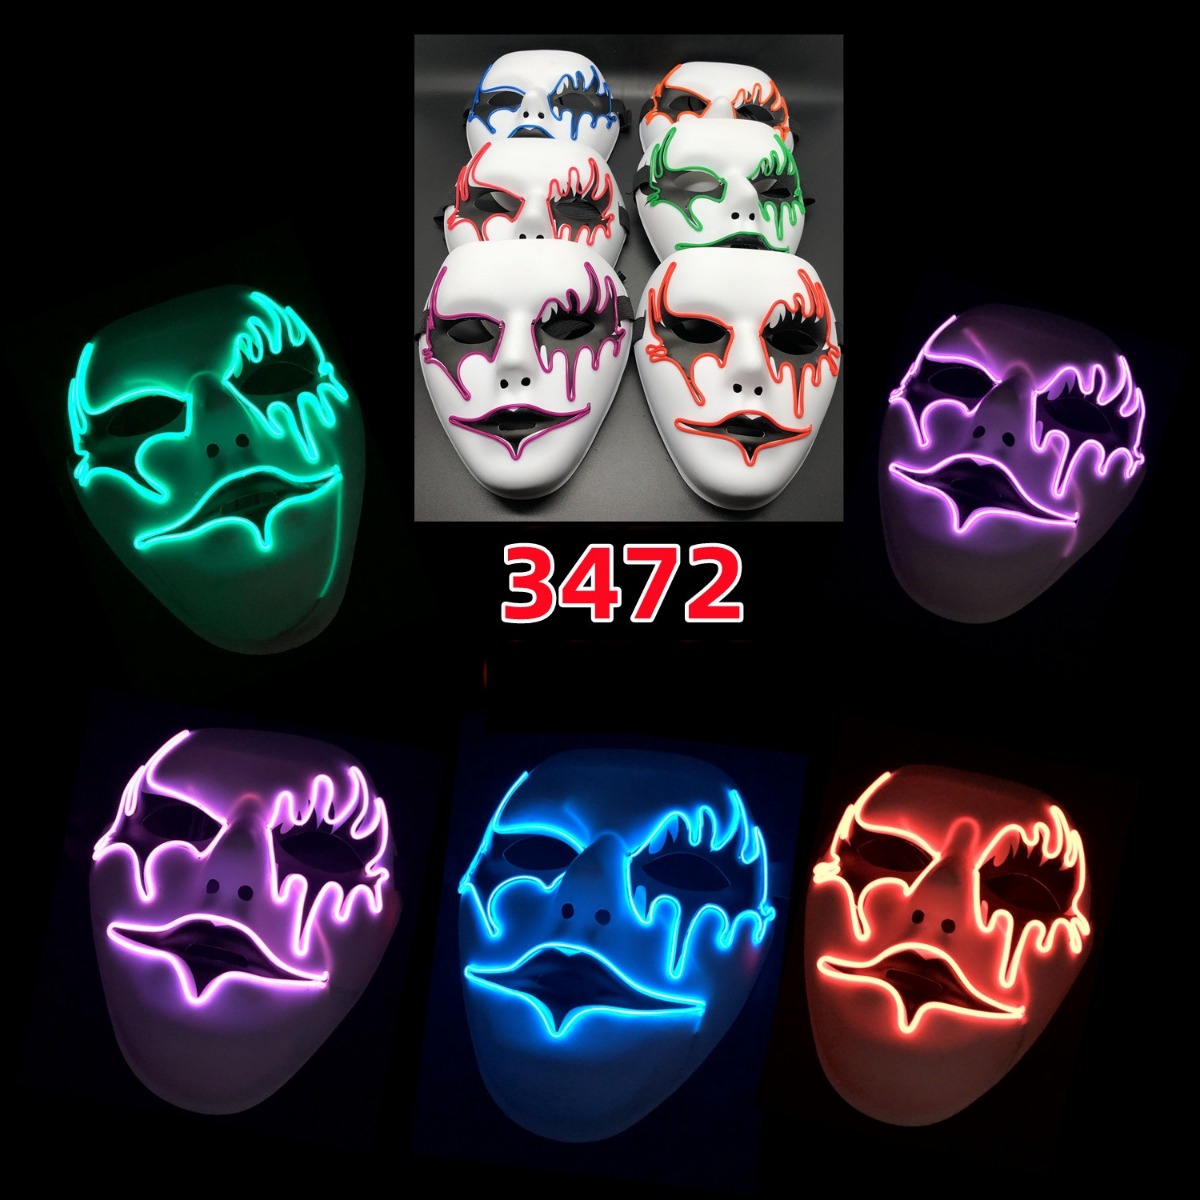 MASK 3472 (BATTERIES NOT INCLUDED)